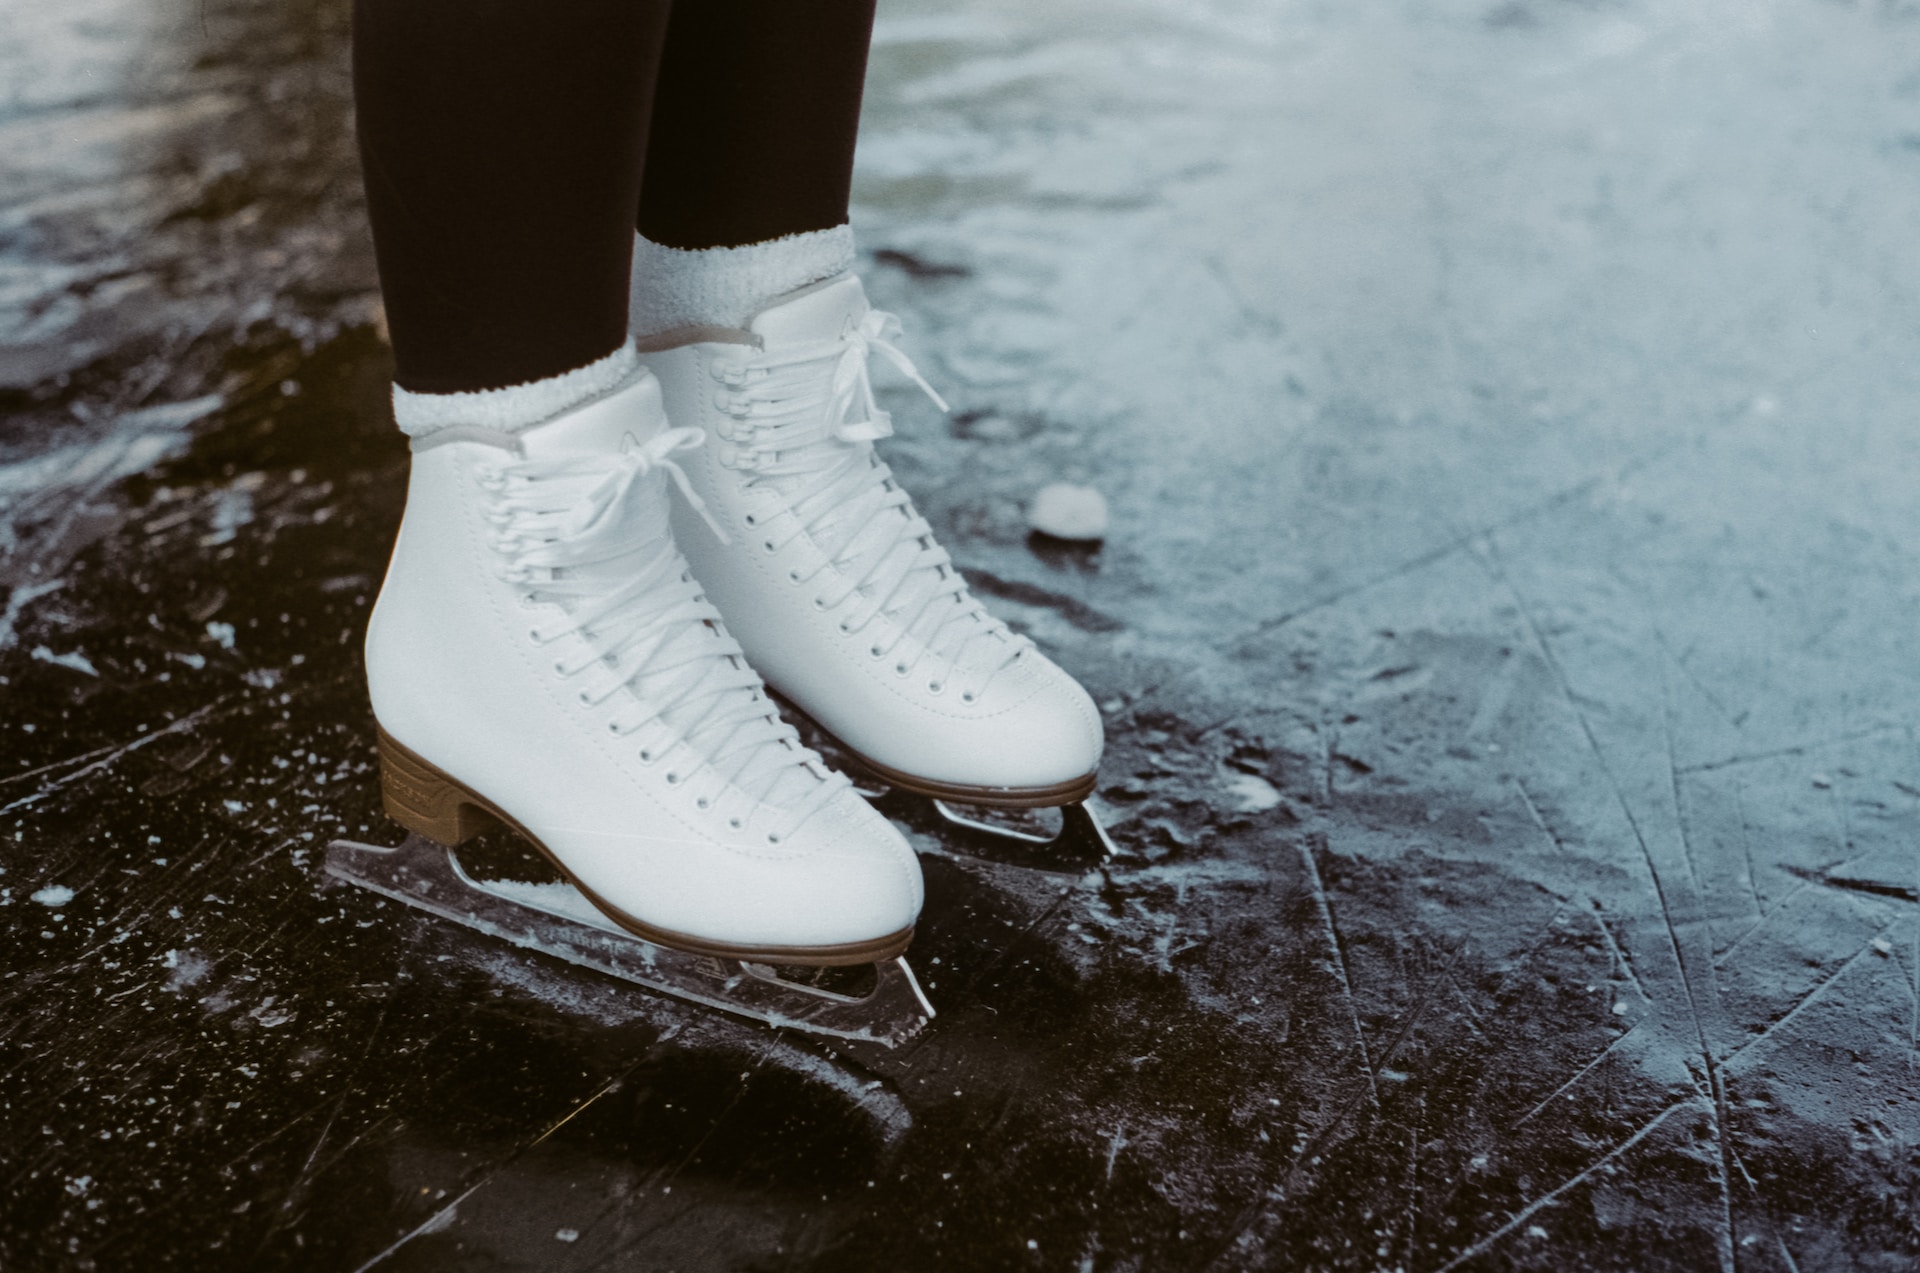 Go ice skating in Bend, Oregon on your next vacation